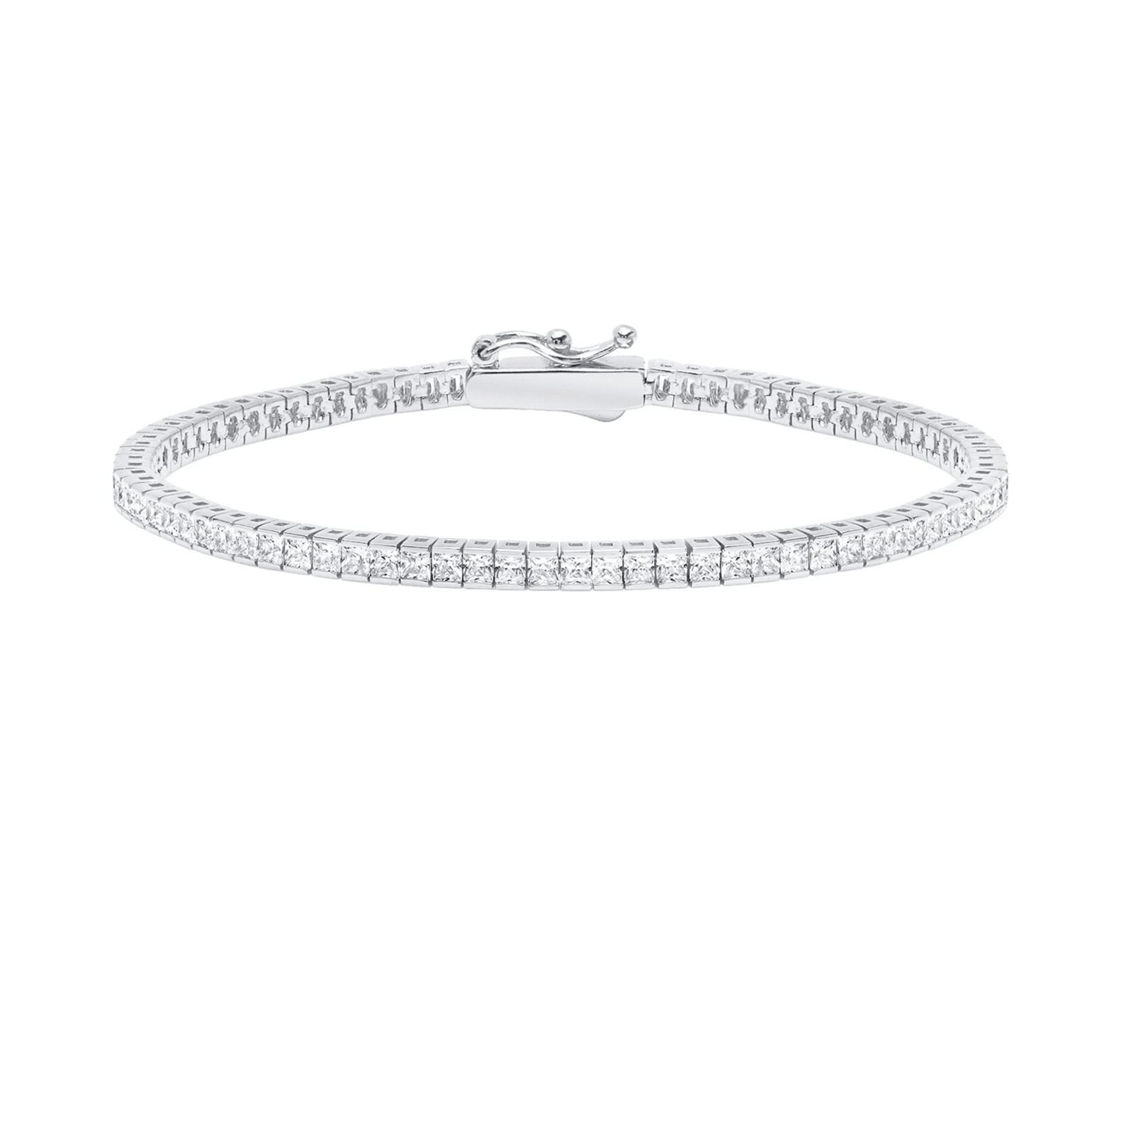 Crislu classic small princess tennis bracelet finished in 18kt yellow gold - Image 2 of 2